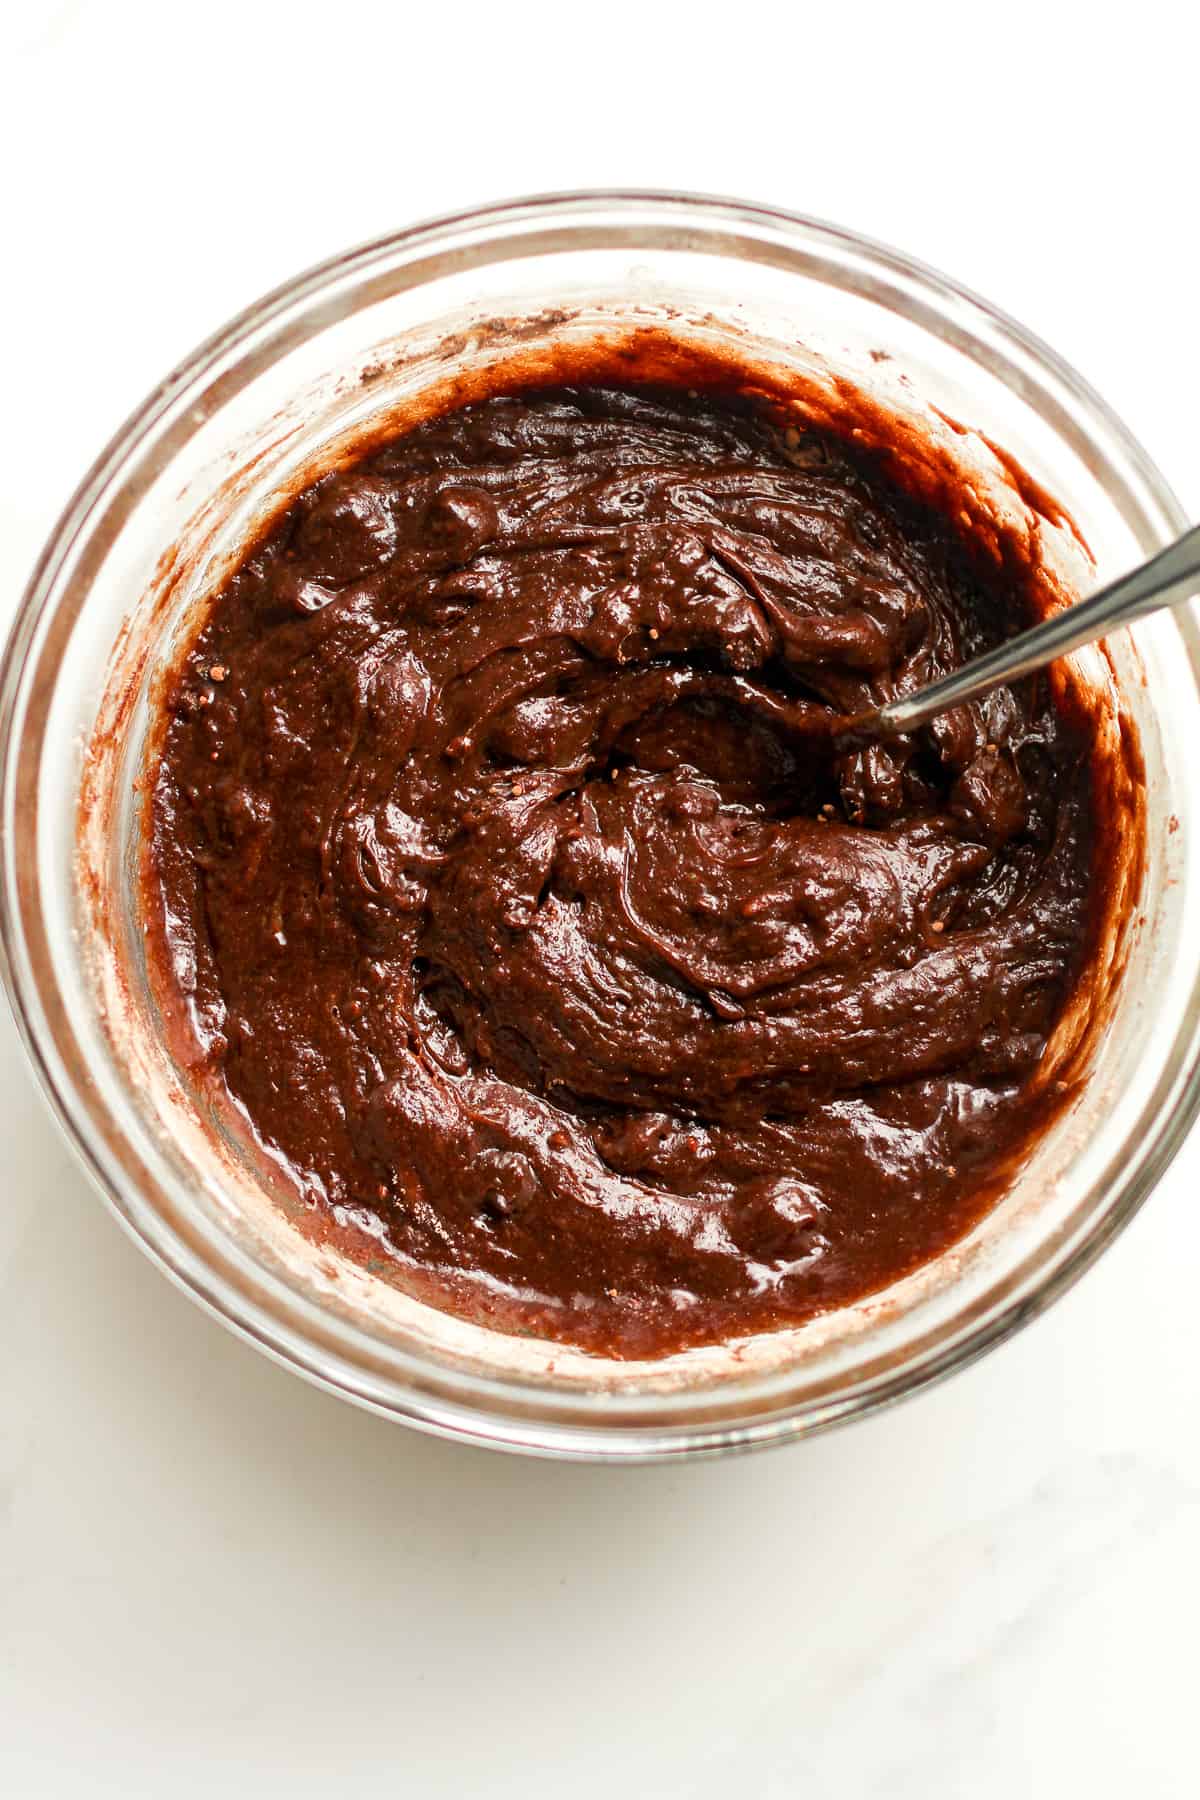 A bowl of the brownie batter with a spoon.